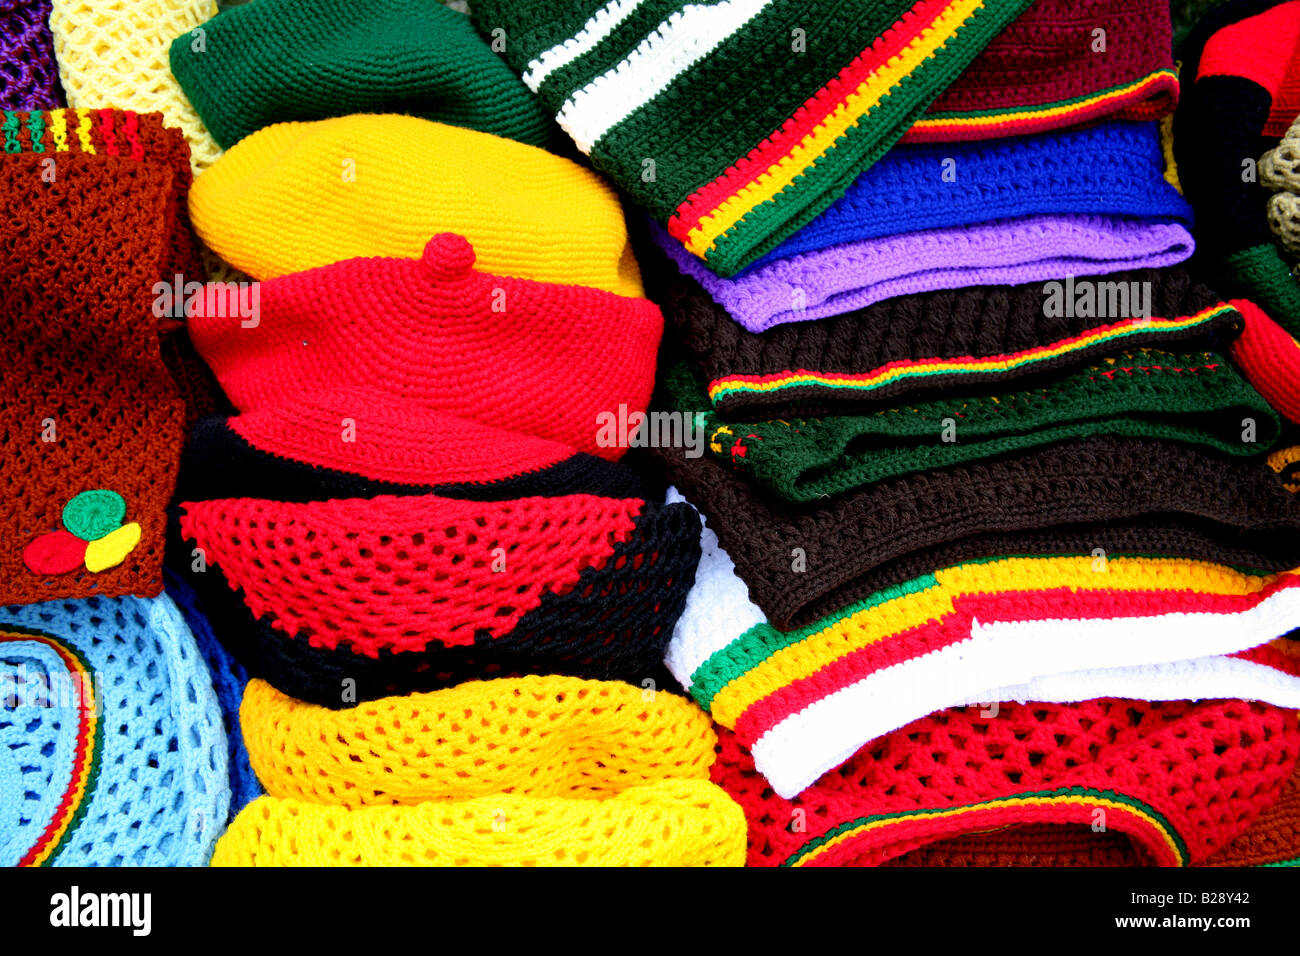 Rastafarian and Jamaican coloured clothing on sale at London festival Stock Photo